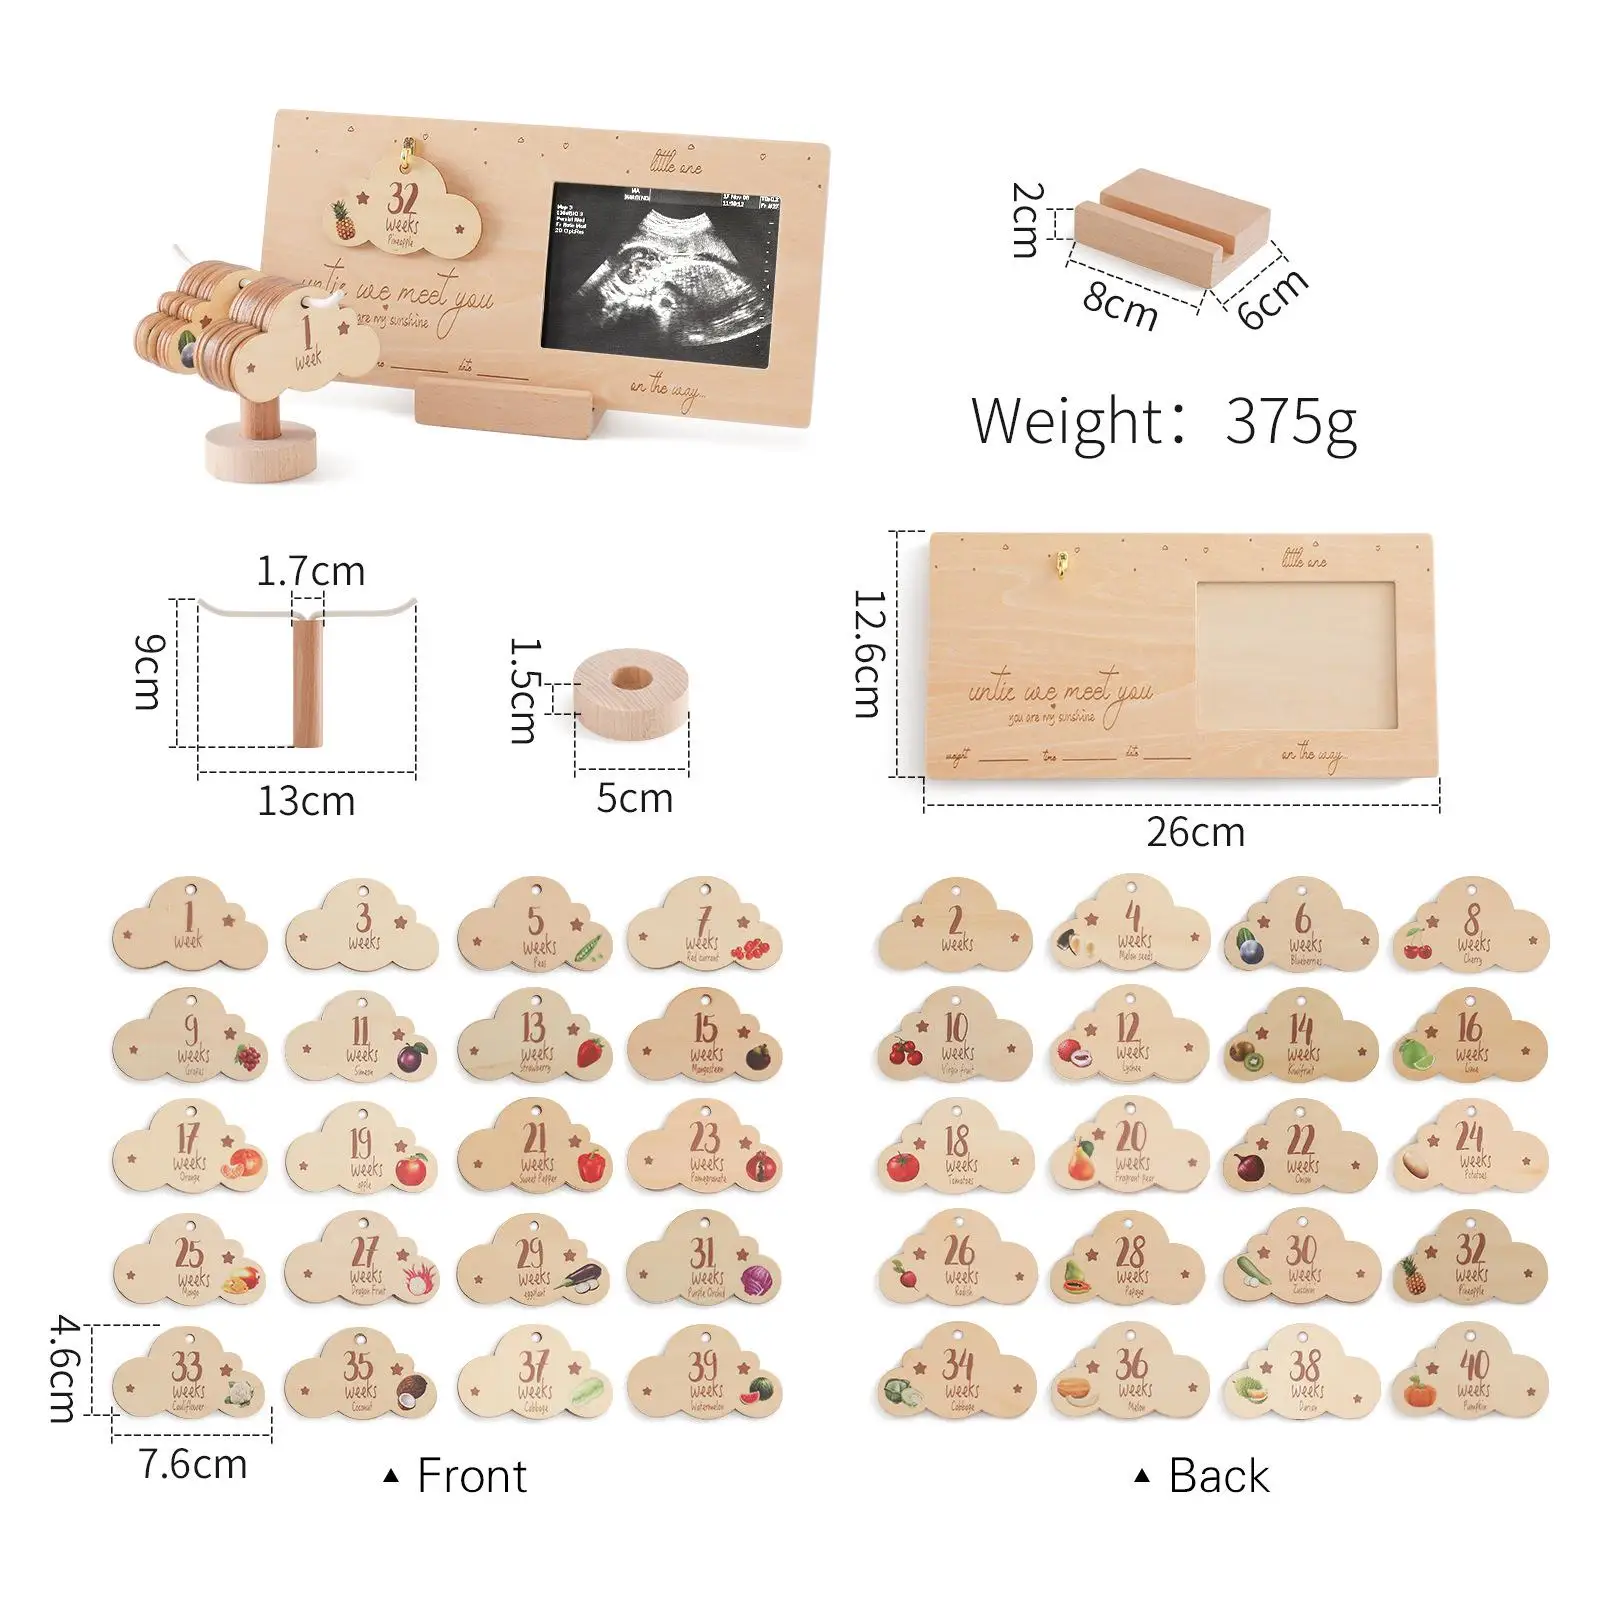 

Sonogram Picture Frame Desk Decoration Wooden Baby Milestone for Photo Props Baby Growth Newborn Gift New Mom Gifts Keepsake Toy